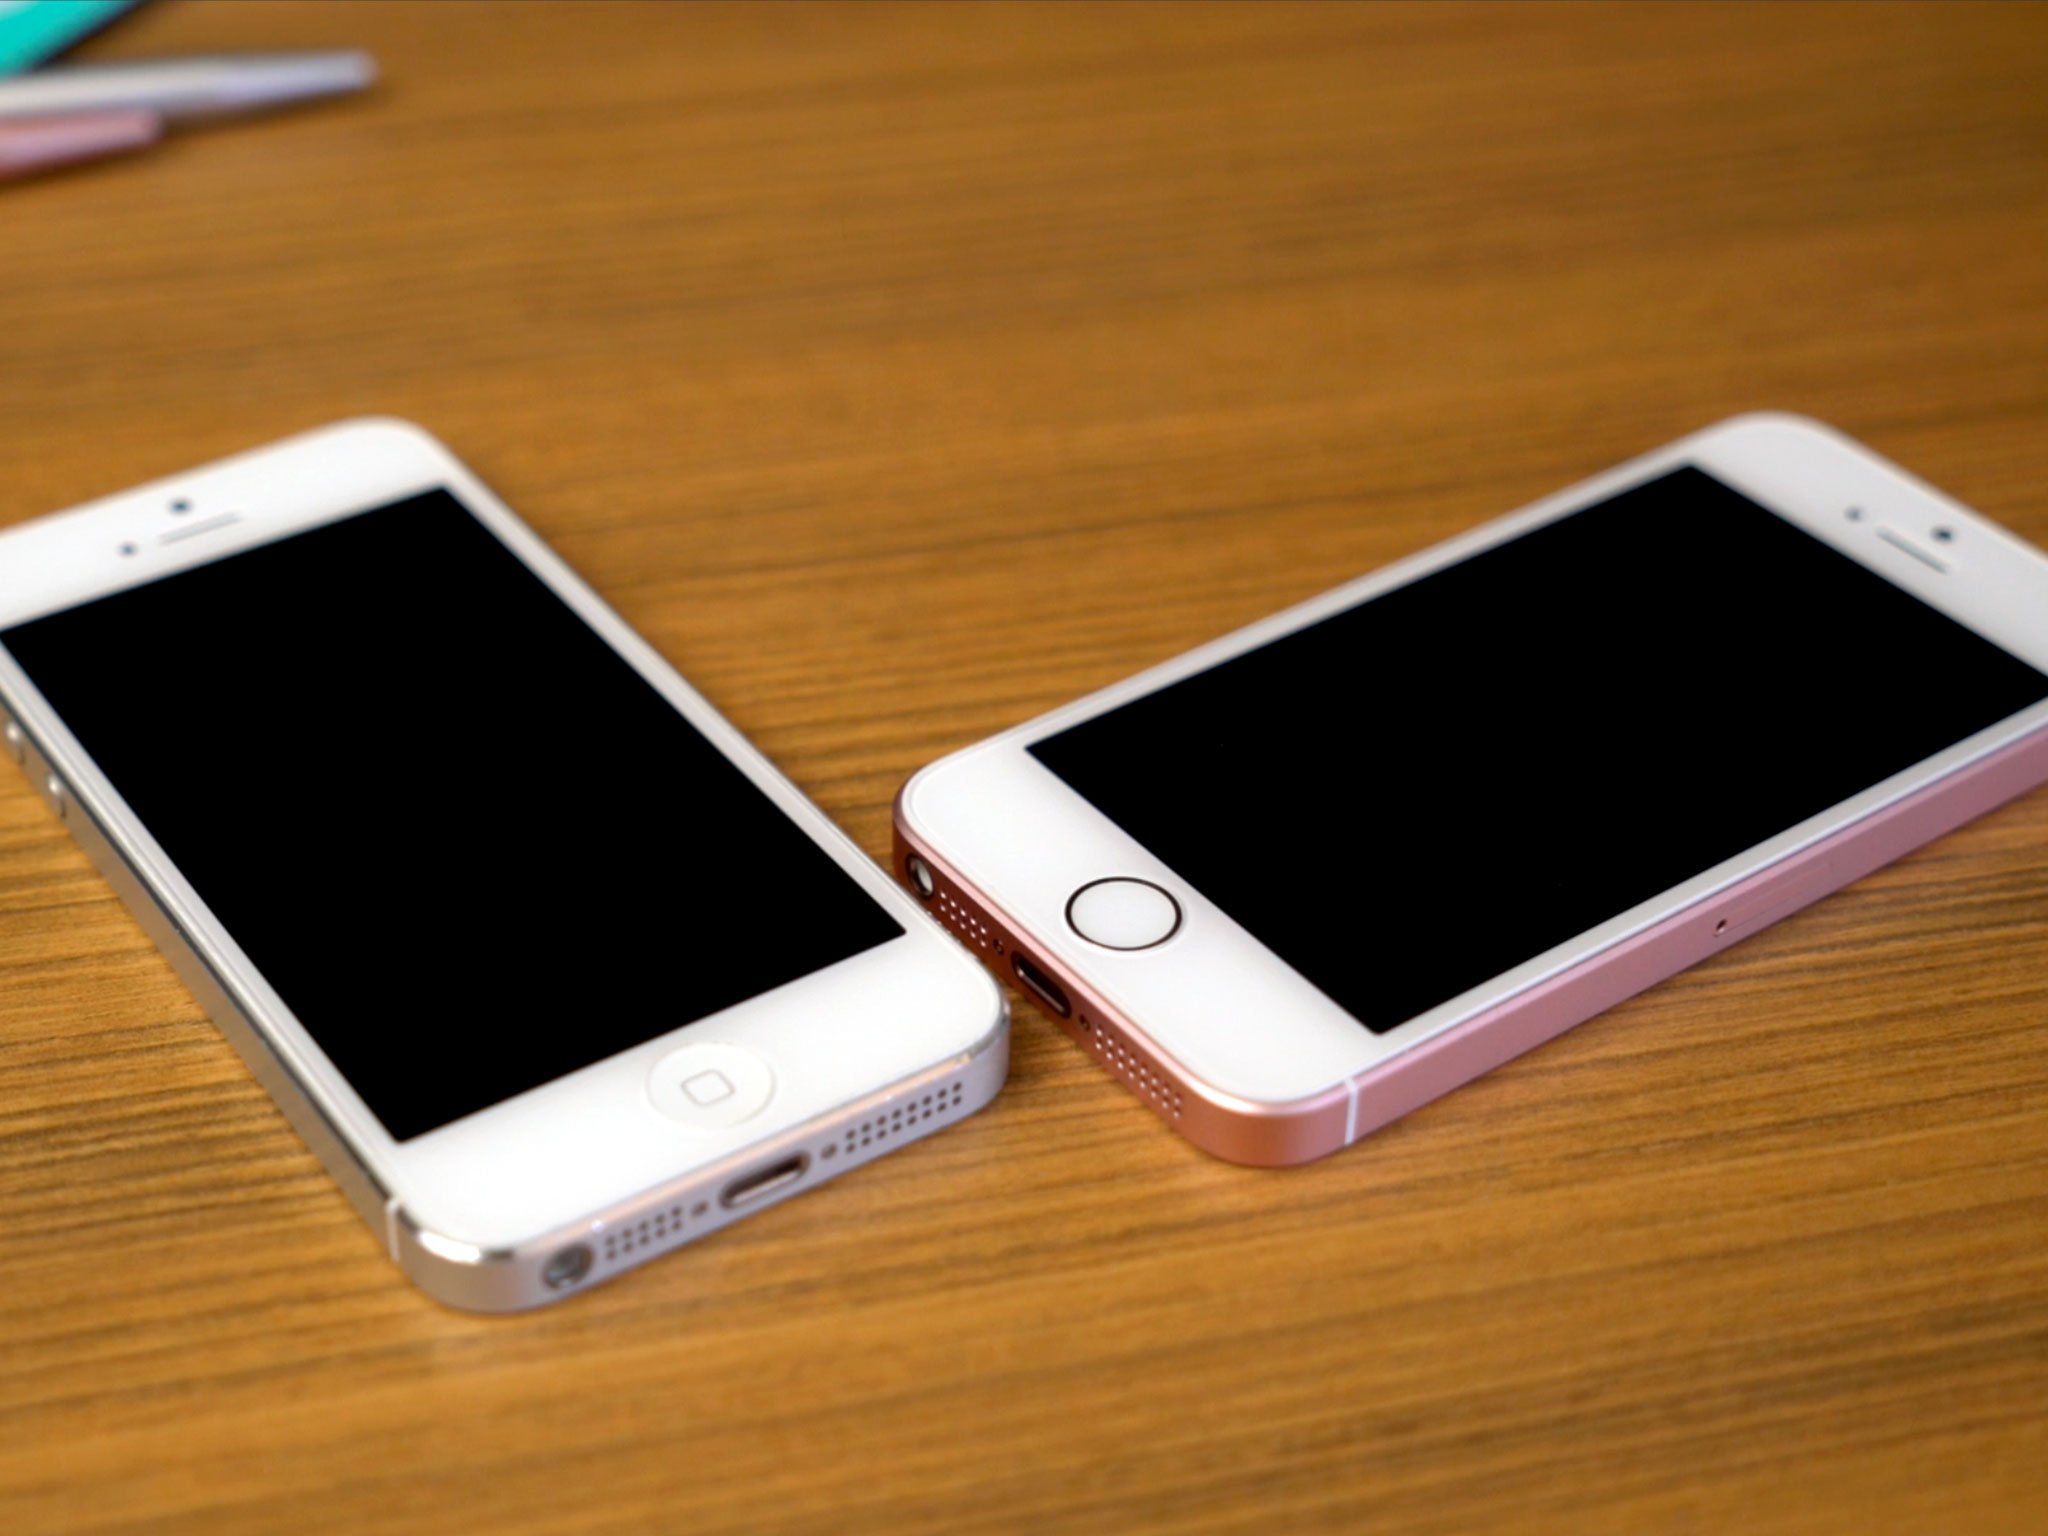 Battery life problems with iPhone SE, iPhone 6s, or iPhone 6s Plus 